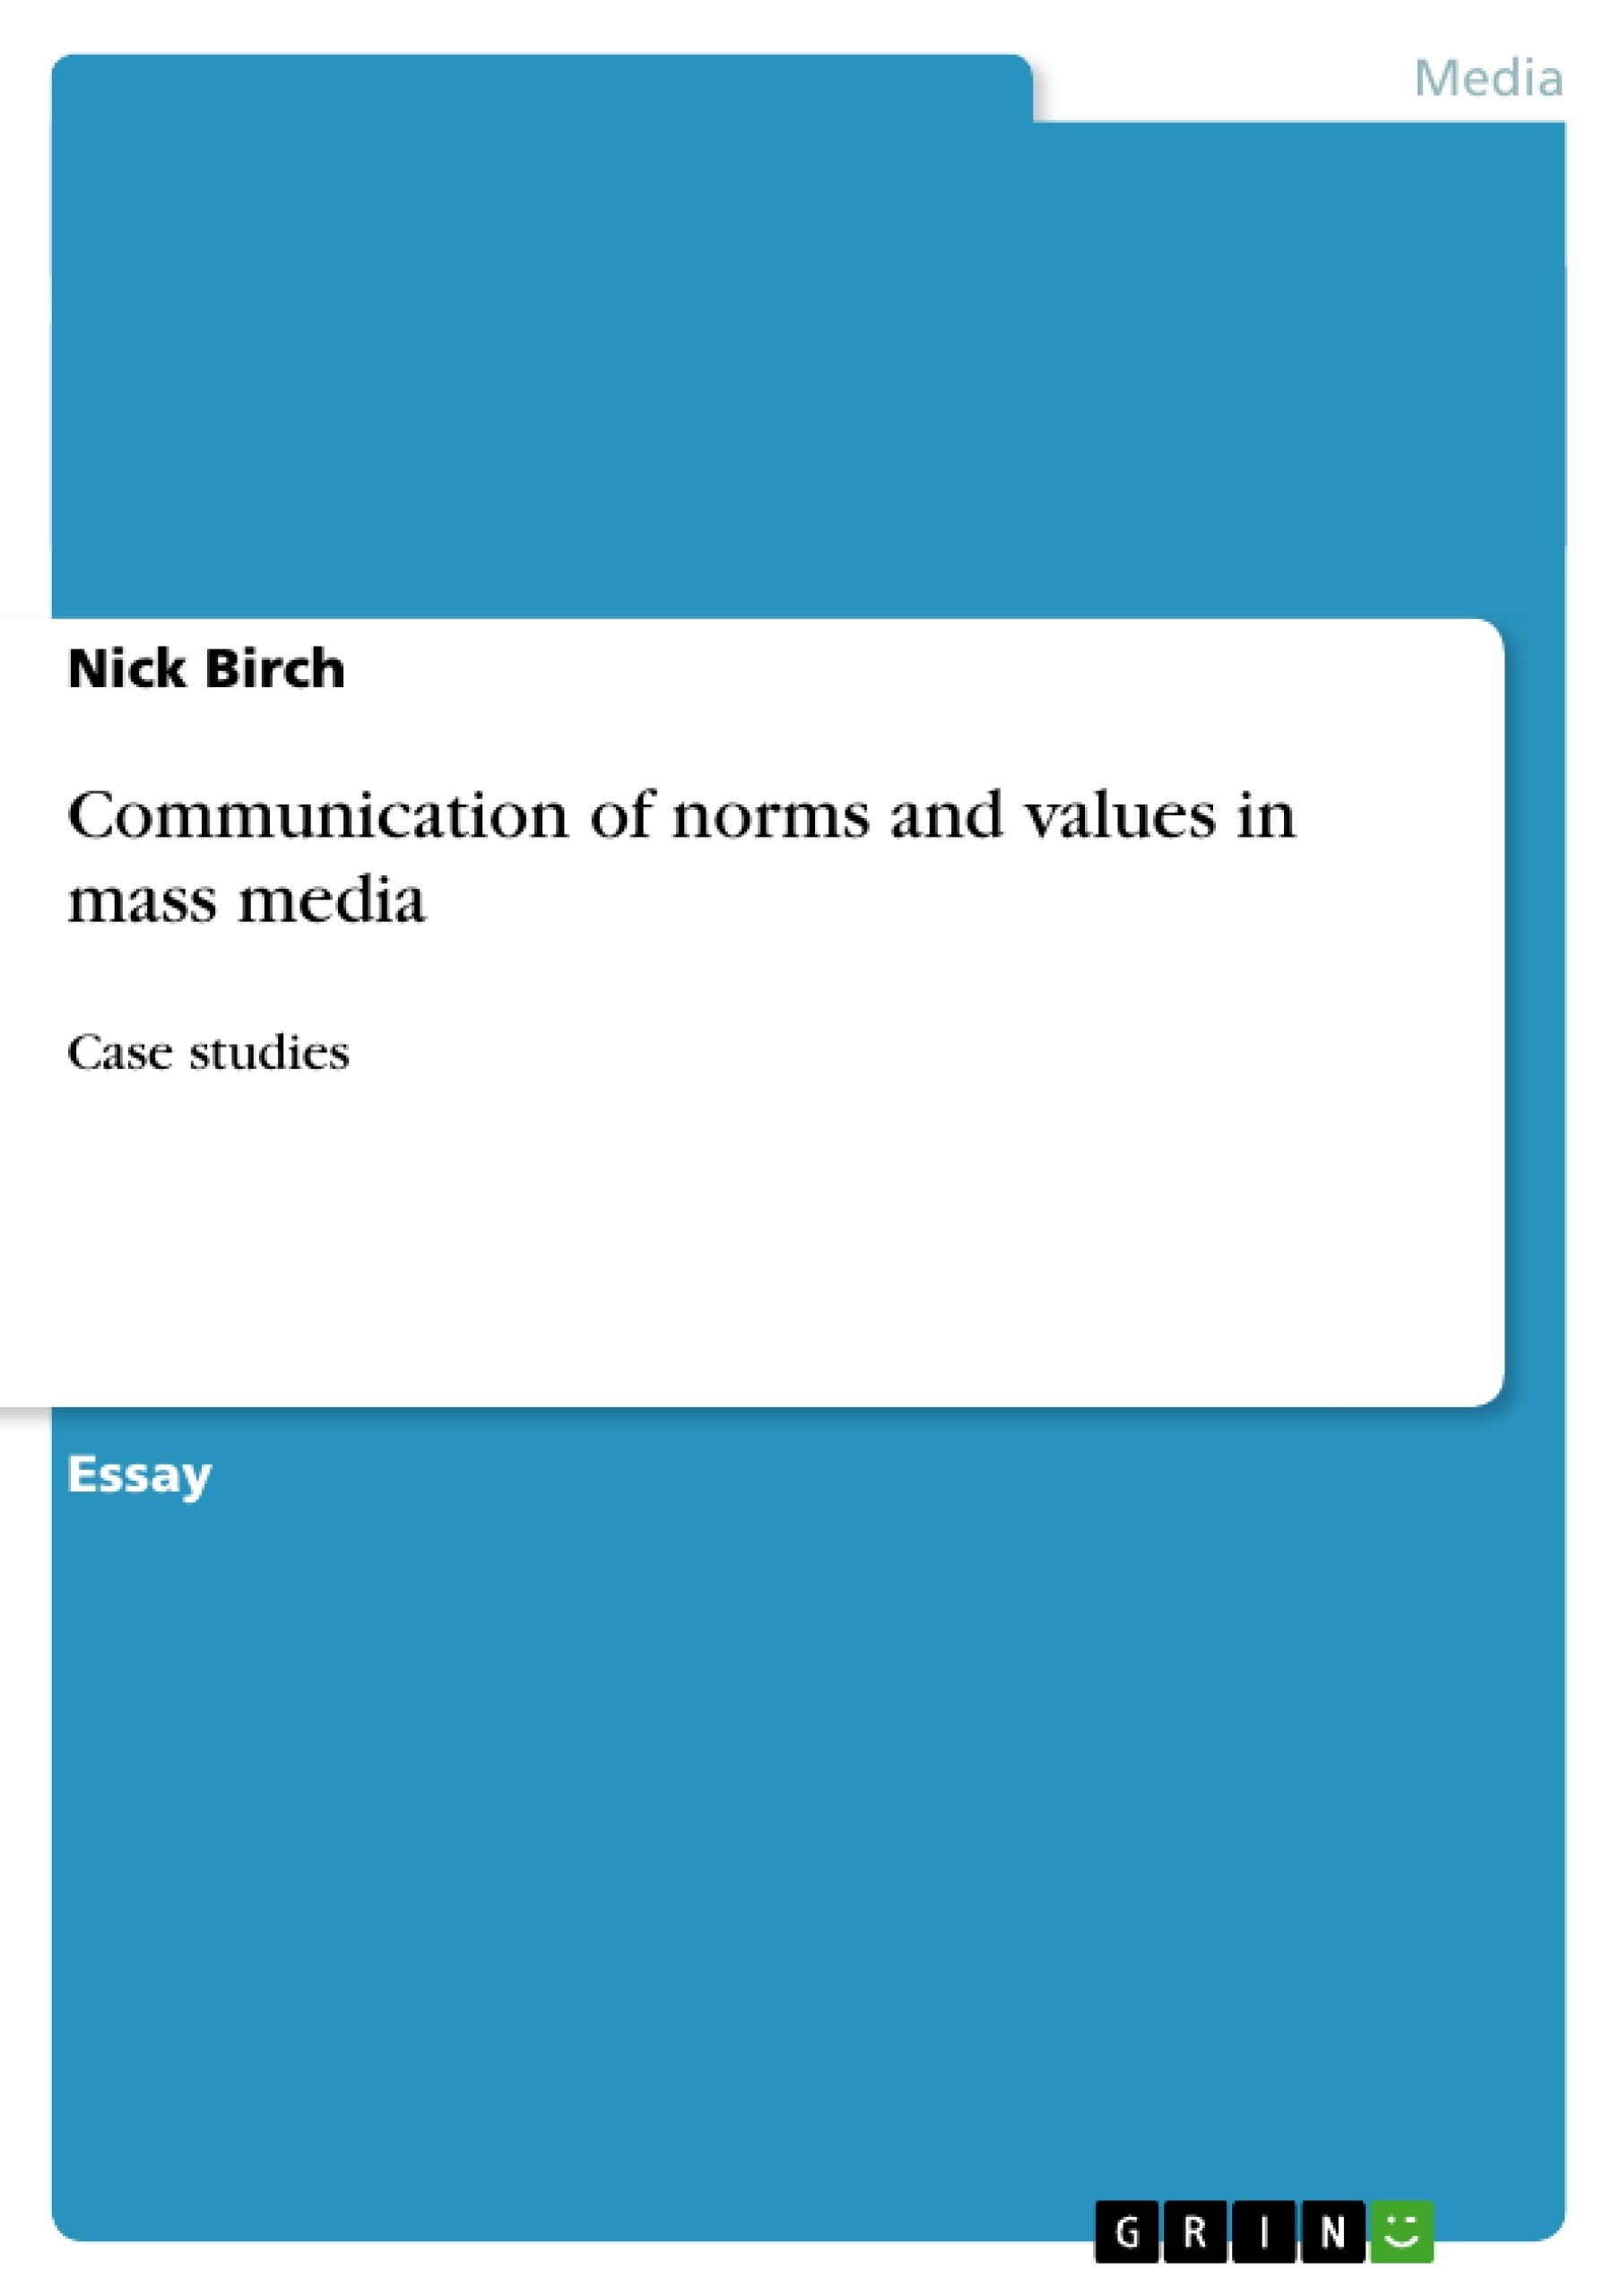 Title: Communication of norms and values in mass media